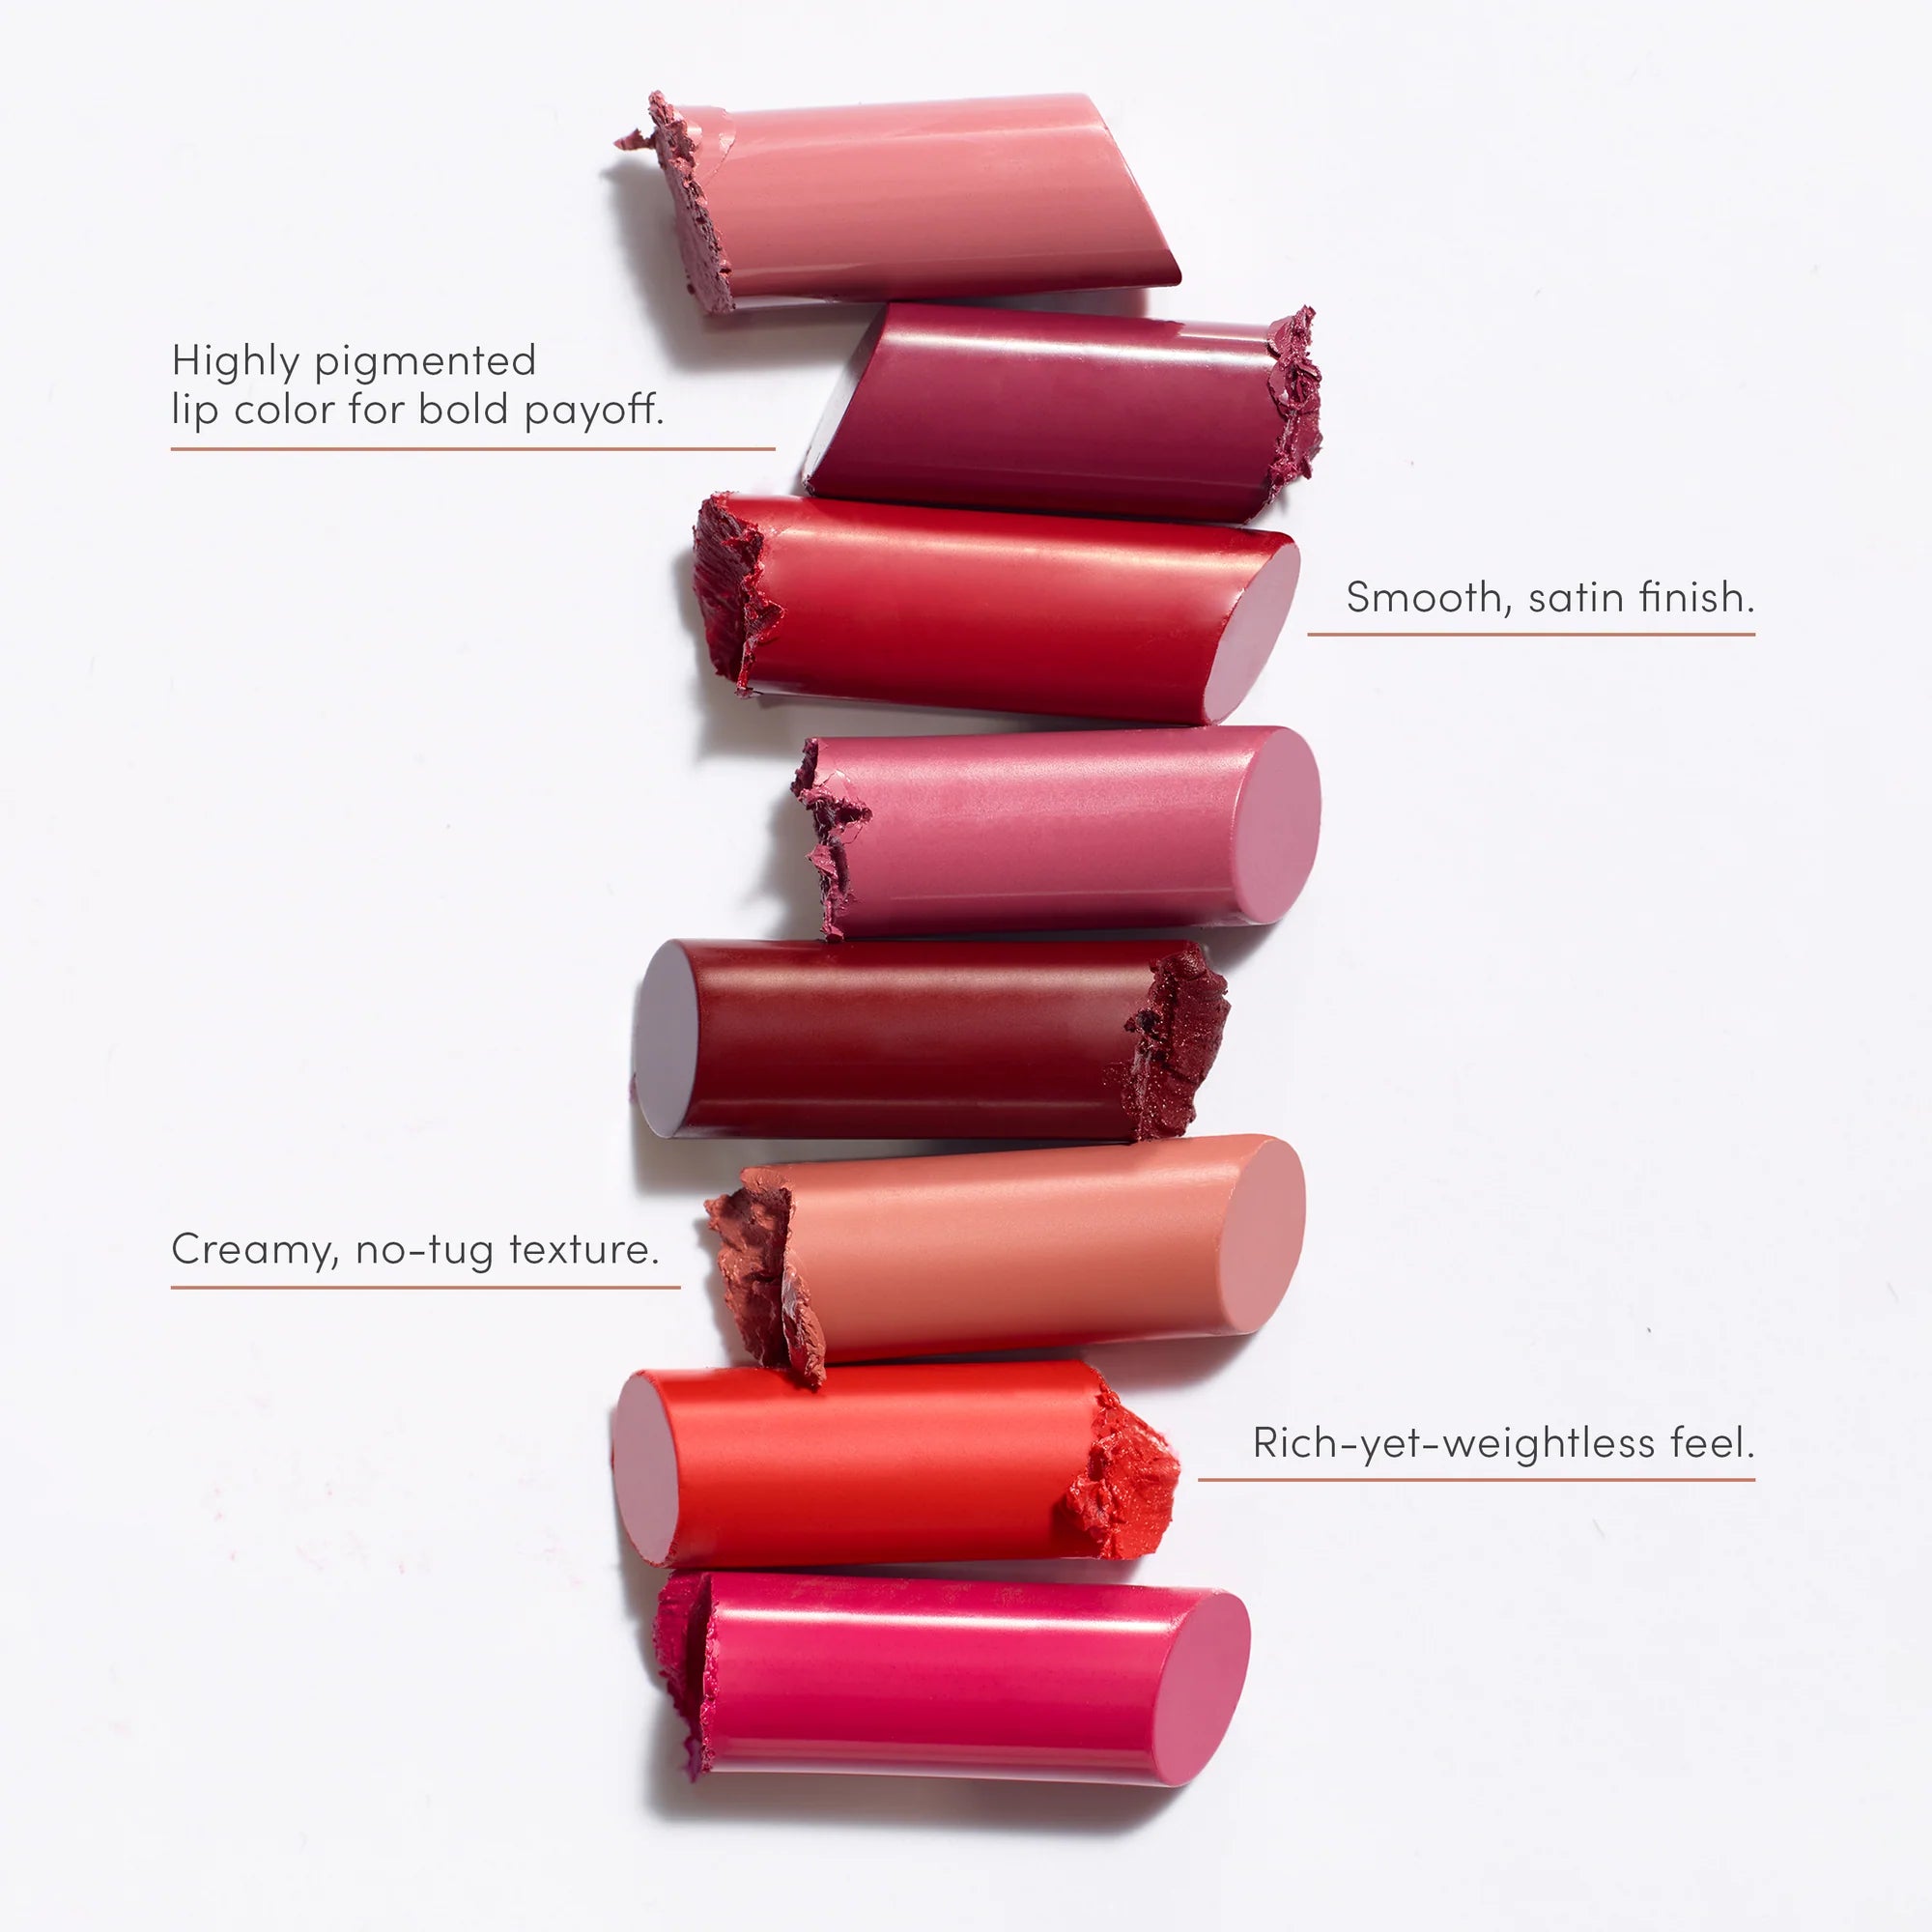 Jane Iredale's ColorLuxe Hydrating Cream Lipstick features and benefits for the lips